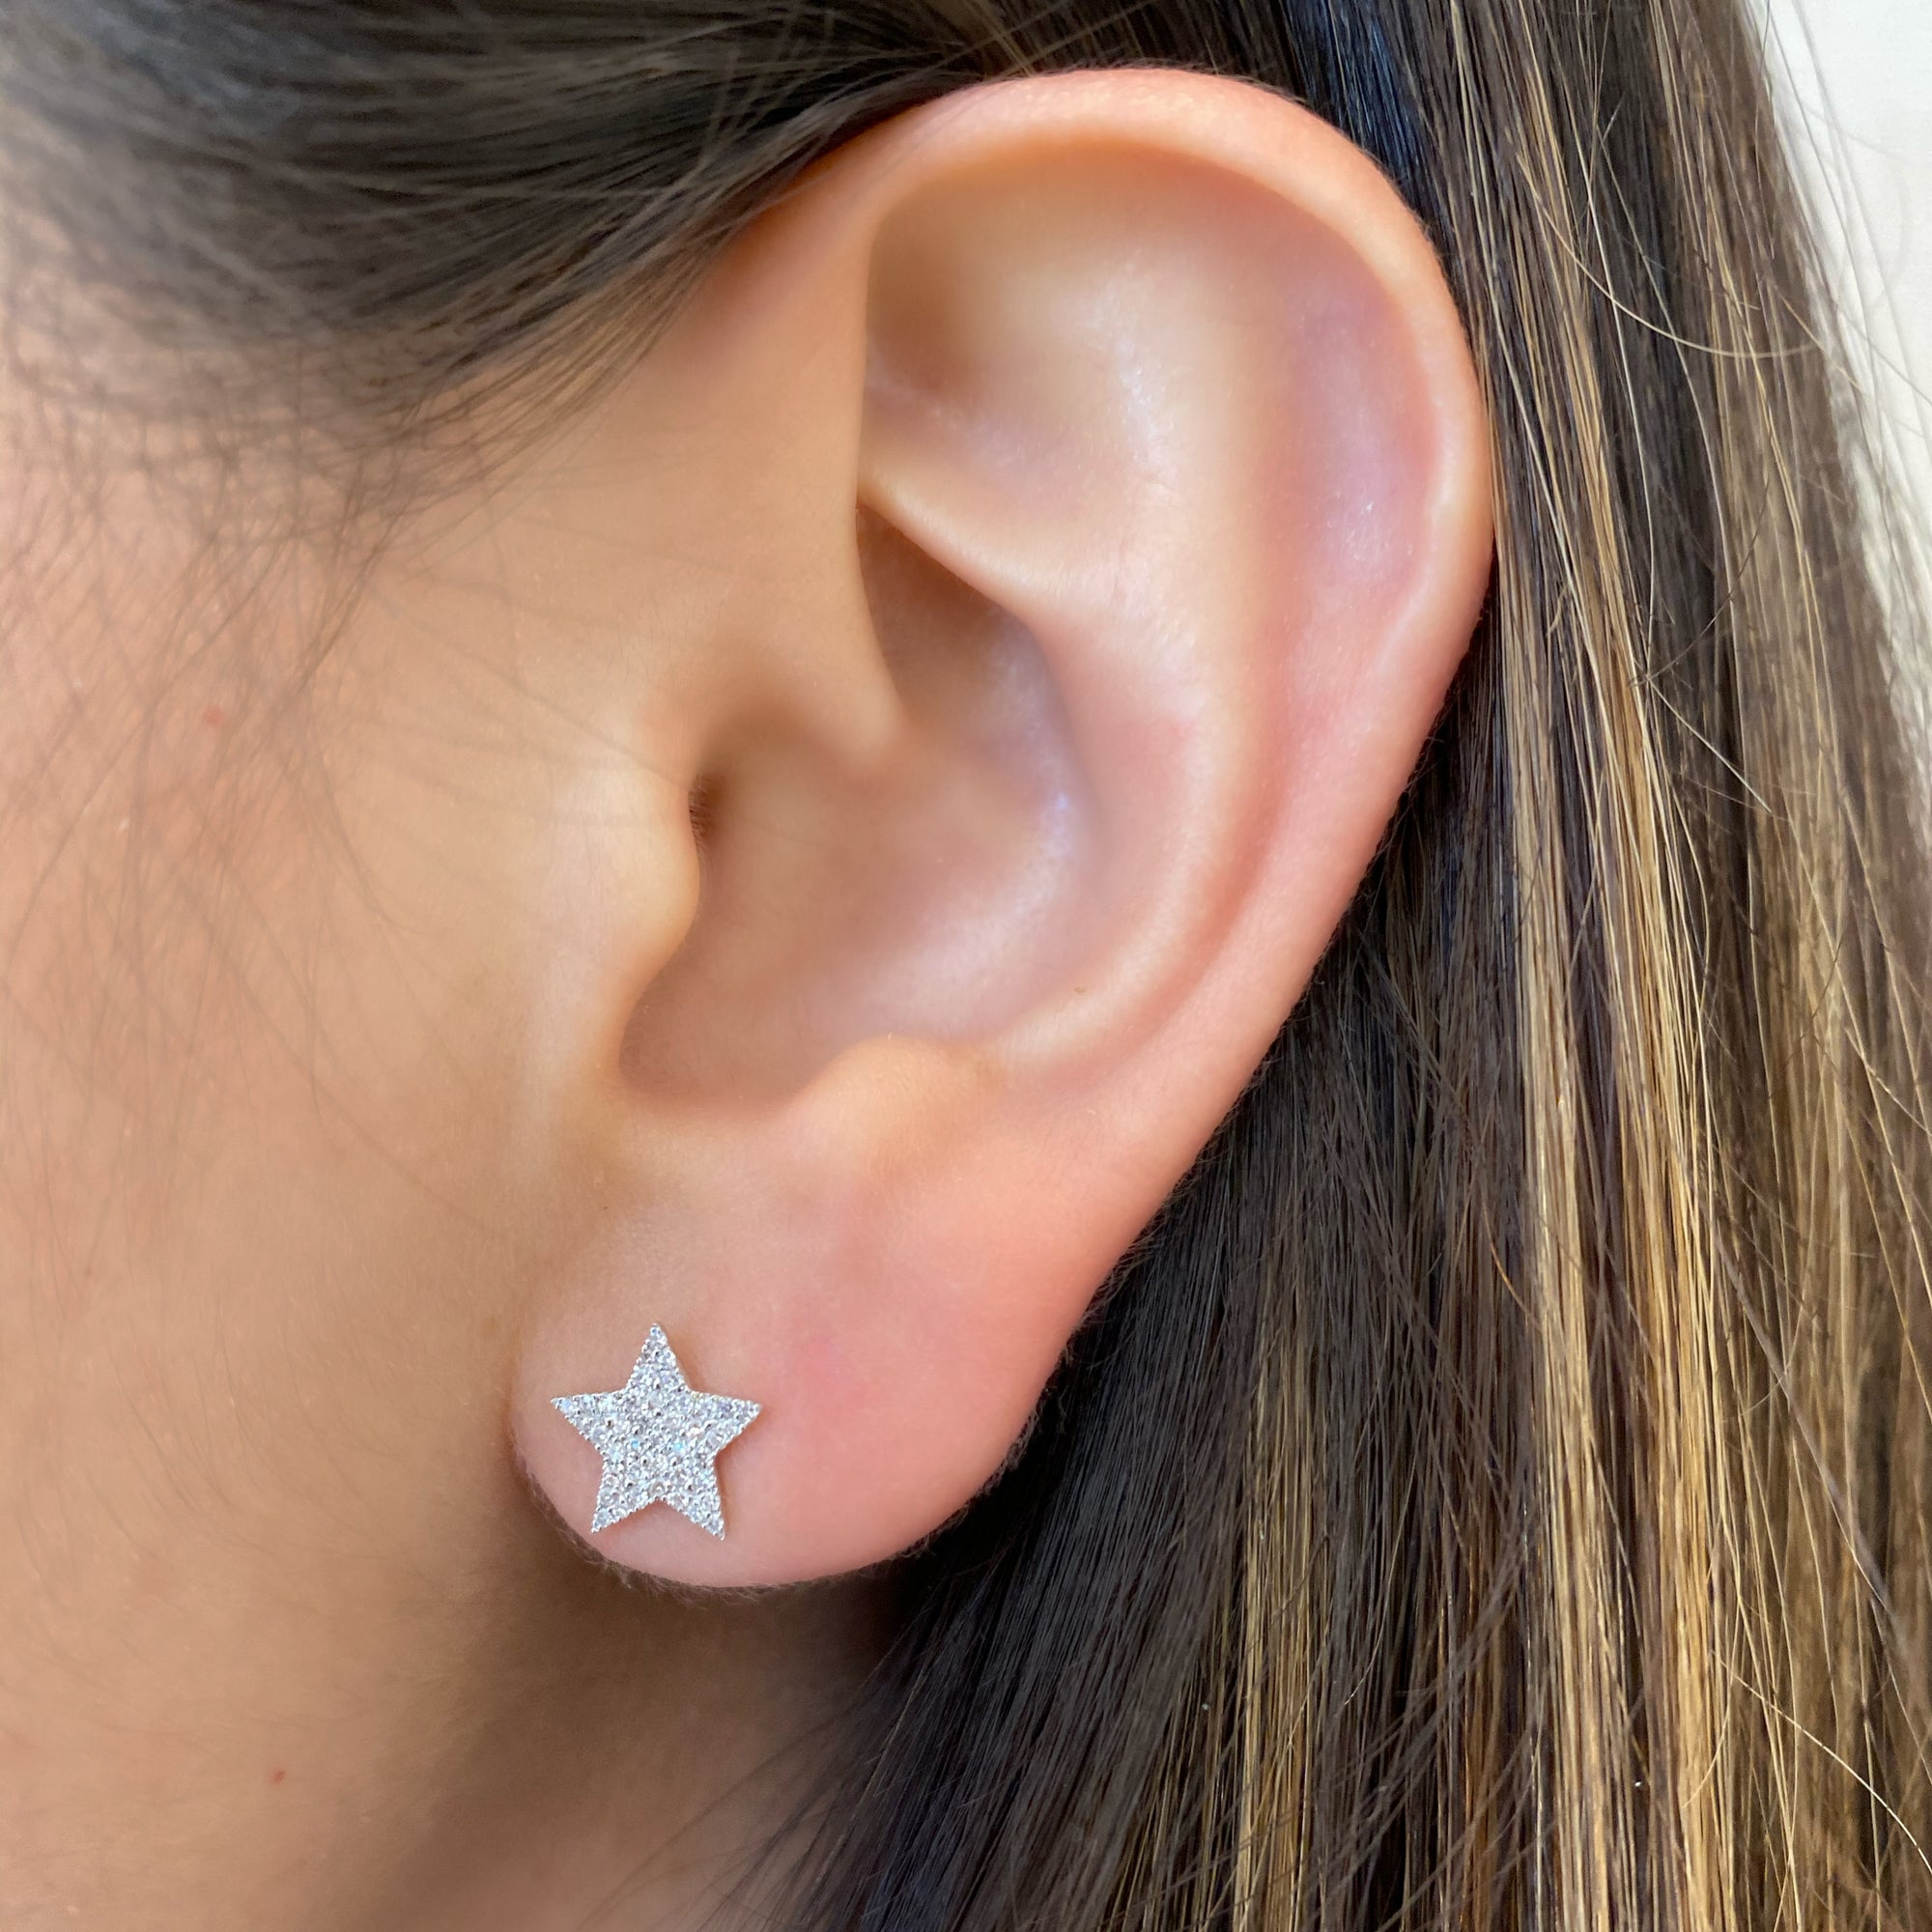 Pave Diamond Star Stud Earrings -14K white gold weighing 1.26 grams -82 Round Diamonds weighing 0.20 cts